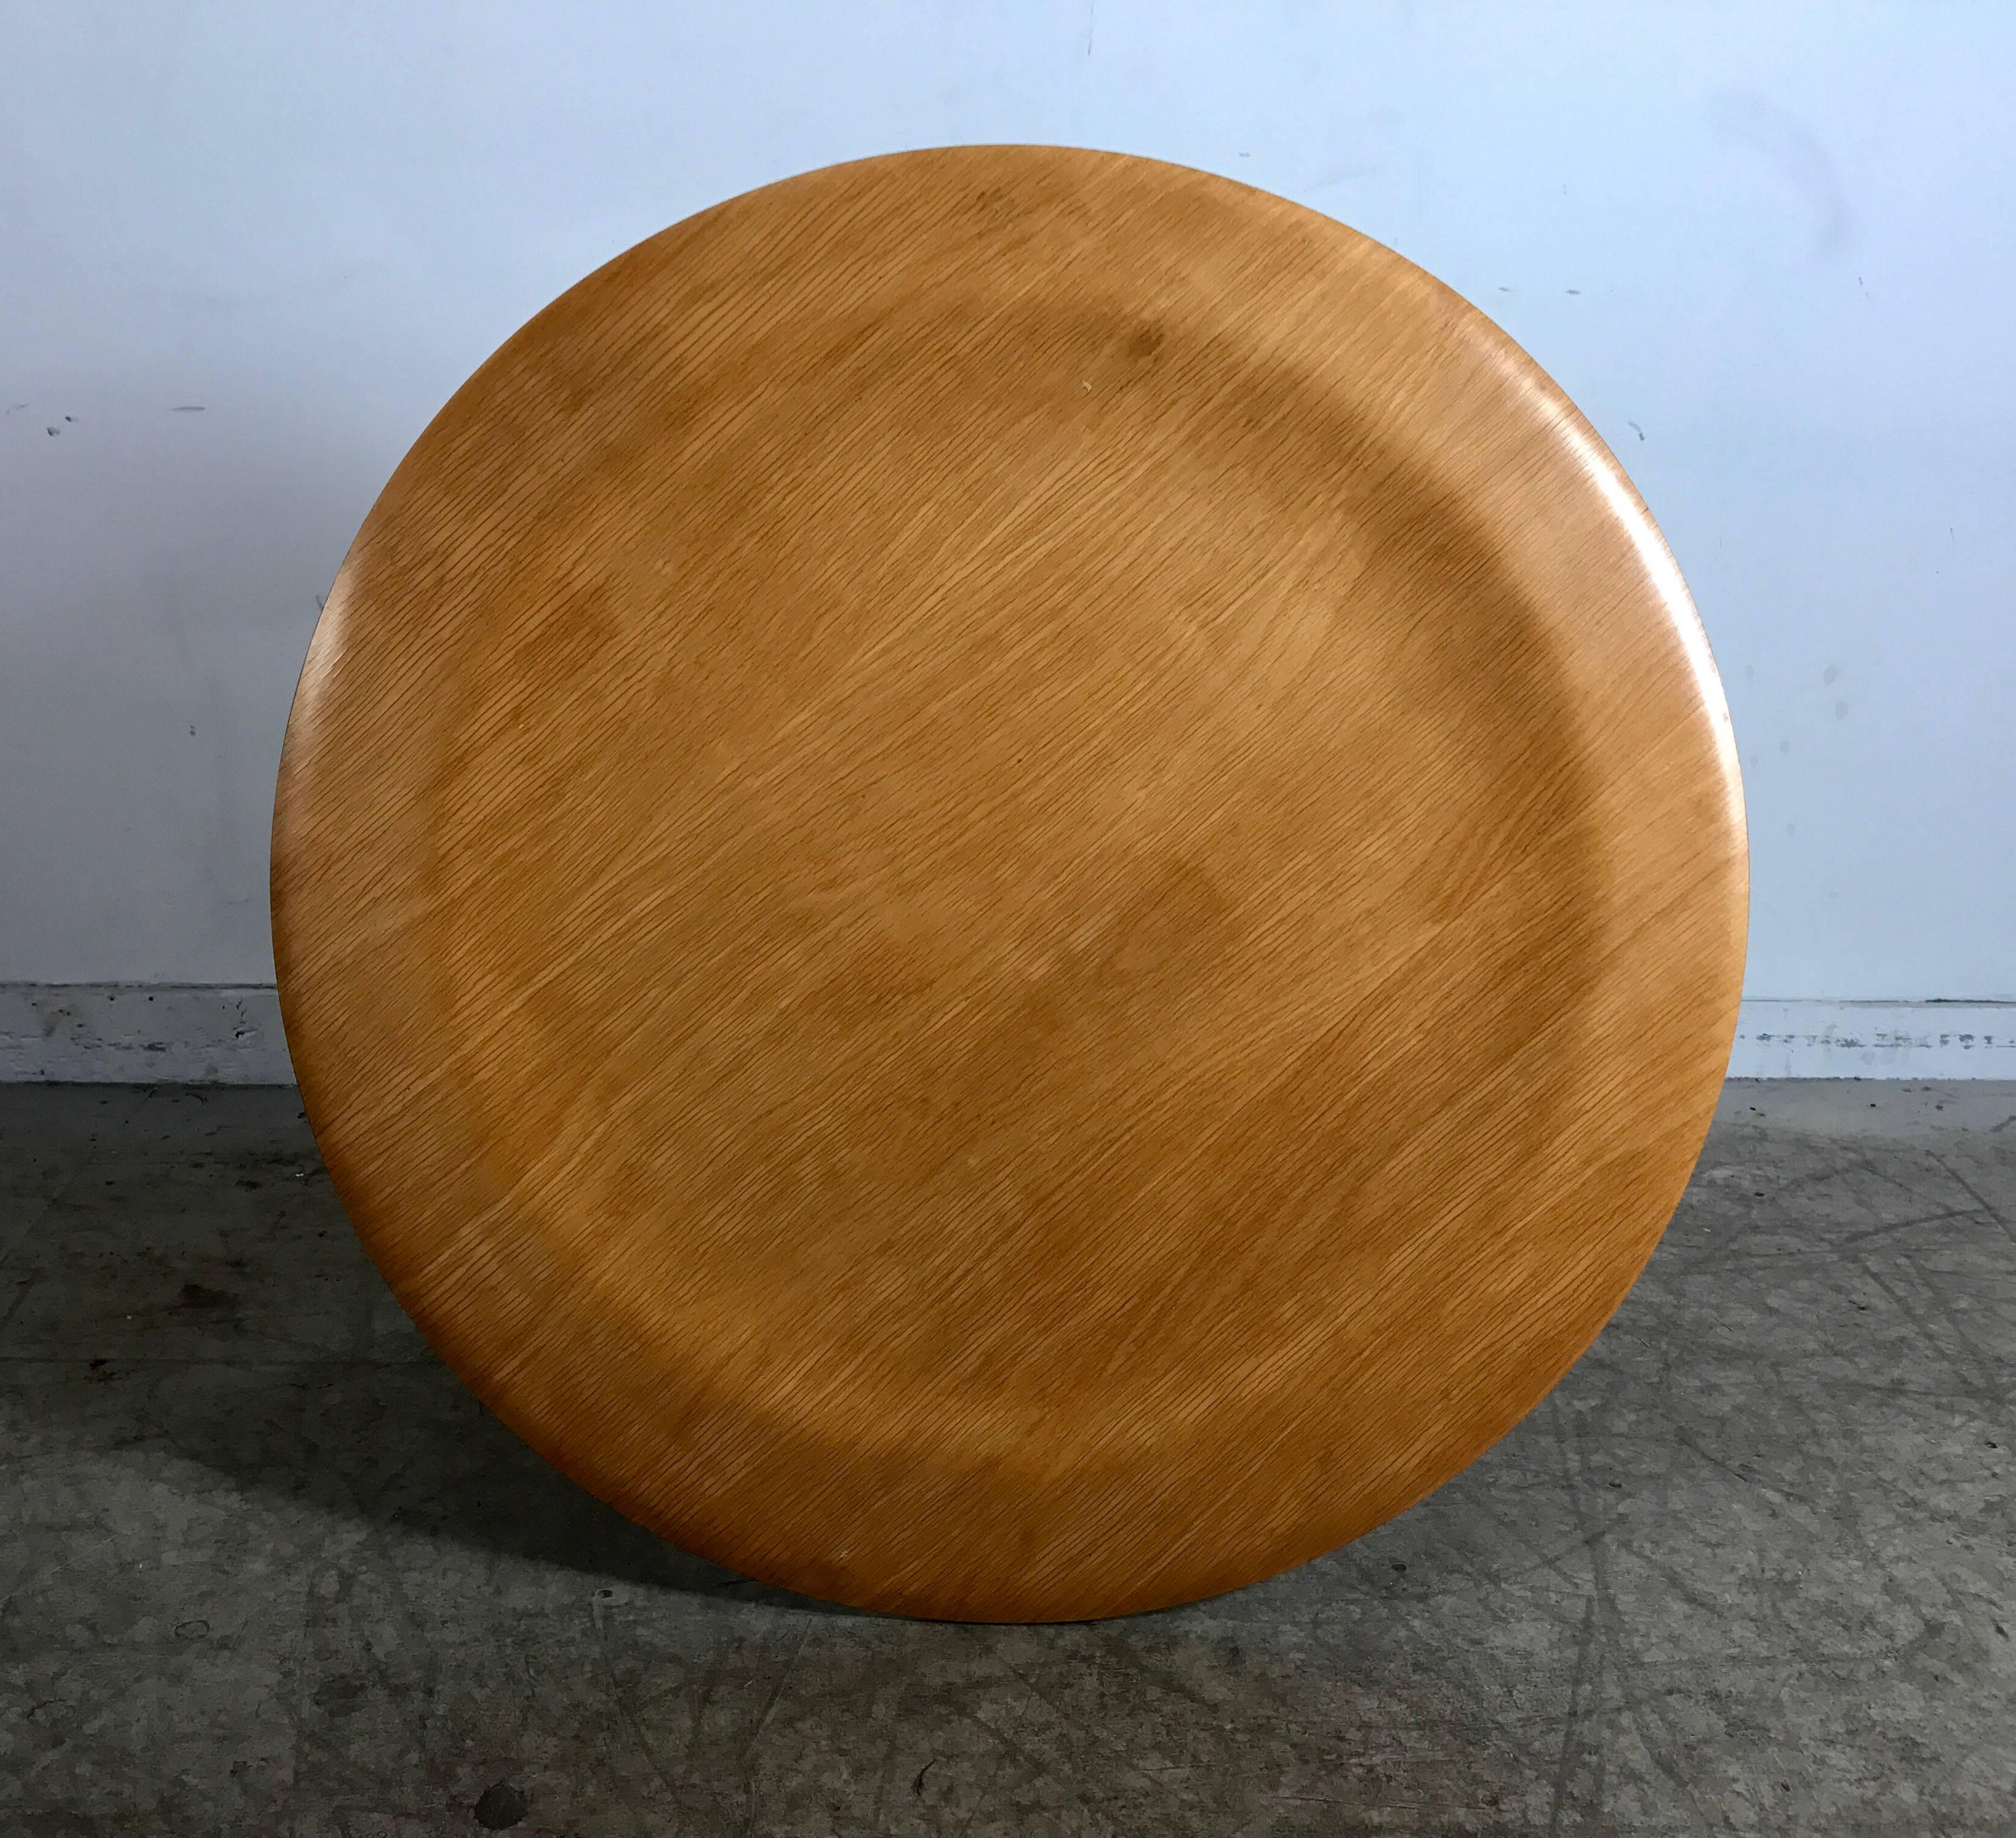 Classic Mid-Century Modern birch plywood dimpled top coffee table designed by Charles Eames, manufactured by Herman Miller, Nice early version, possibly circa 1950 production,(early feet pads)
Charles and Ray Eames applied the same breakthrough